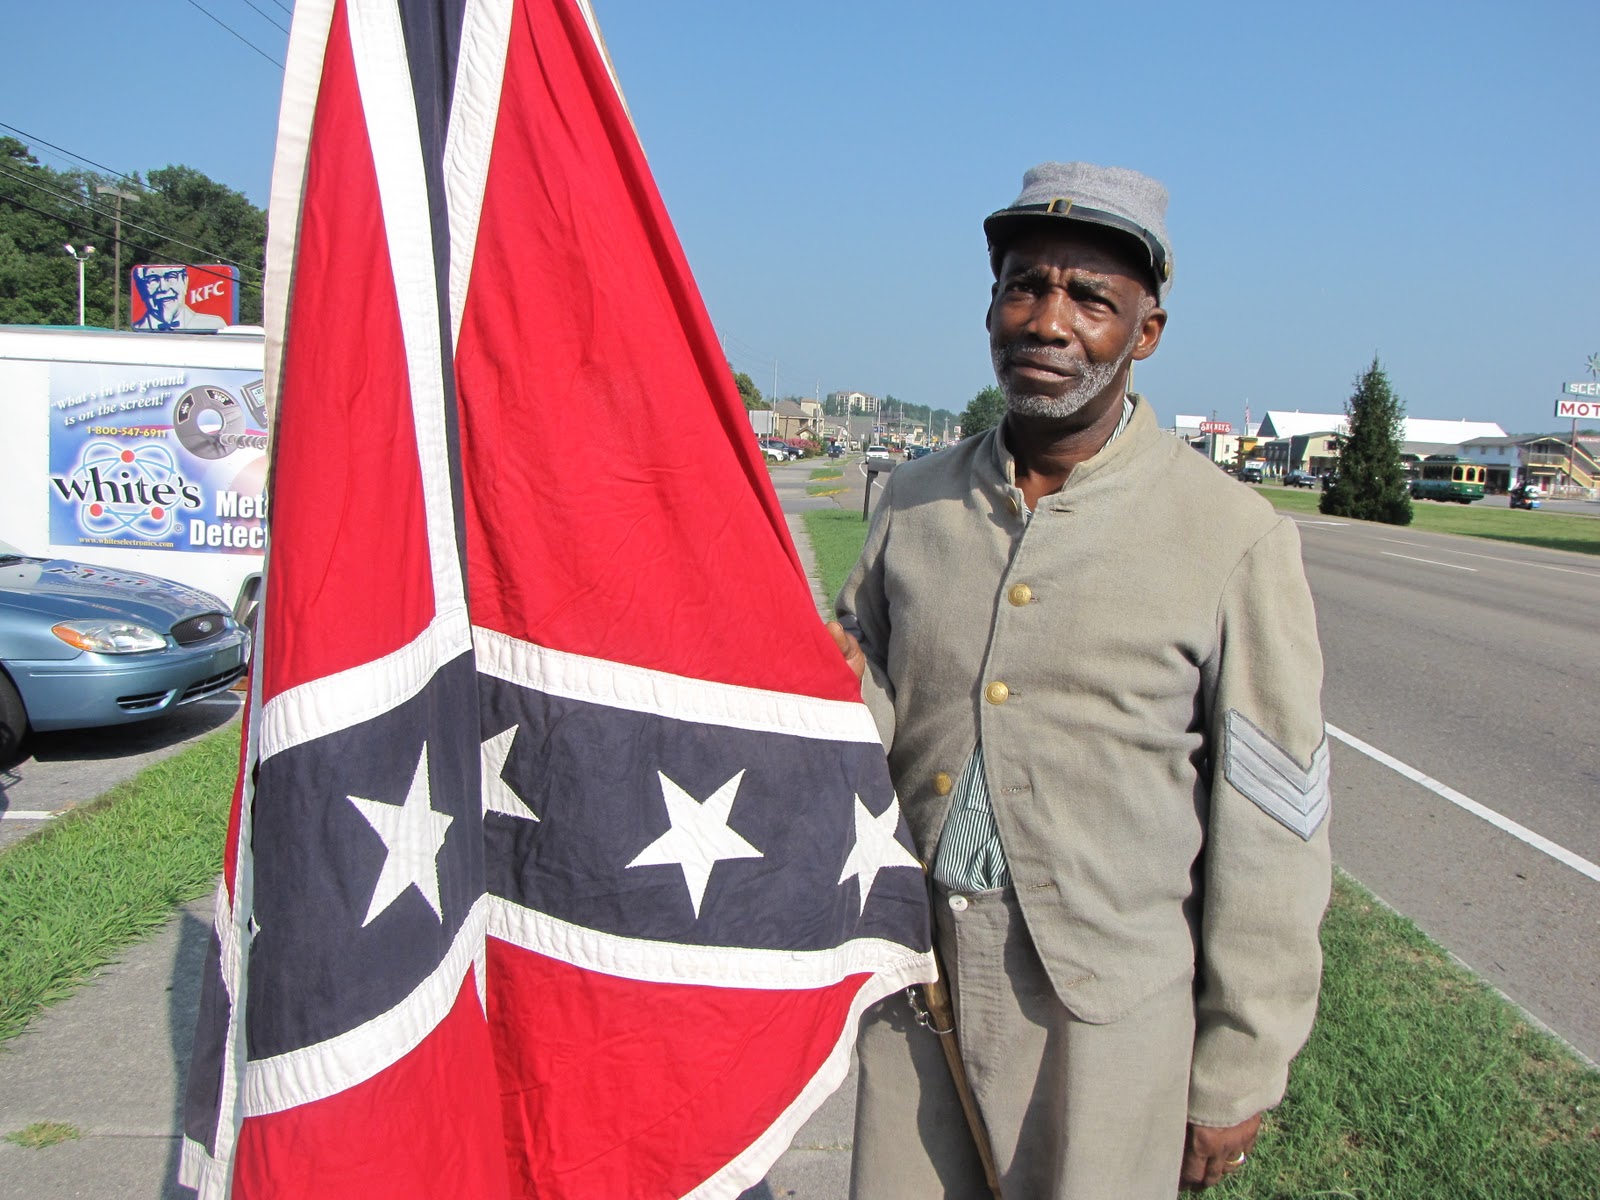 Douglass-Riverview News and Current Events: A Black Man and the Confederate  Flag: A Study of Contrasts